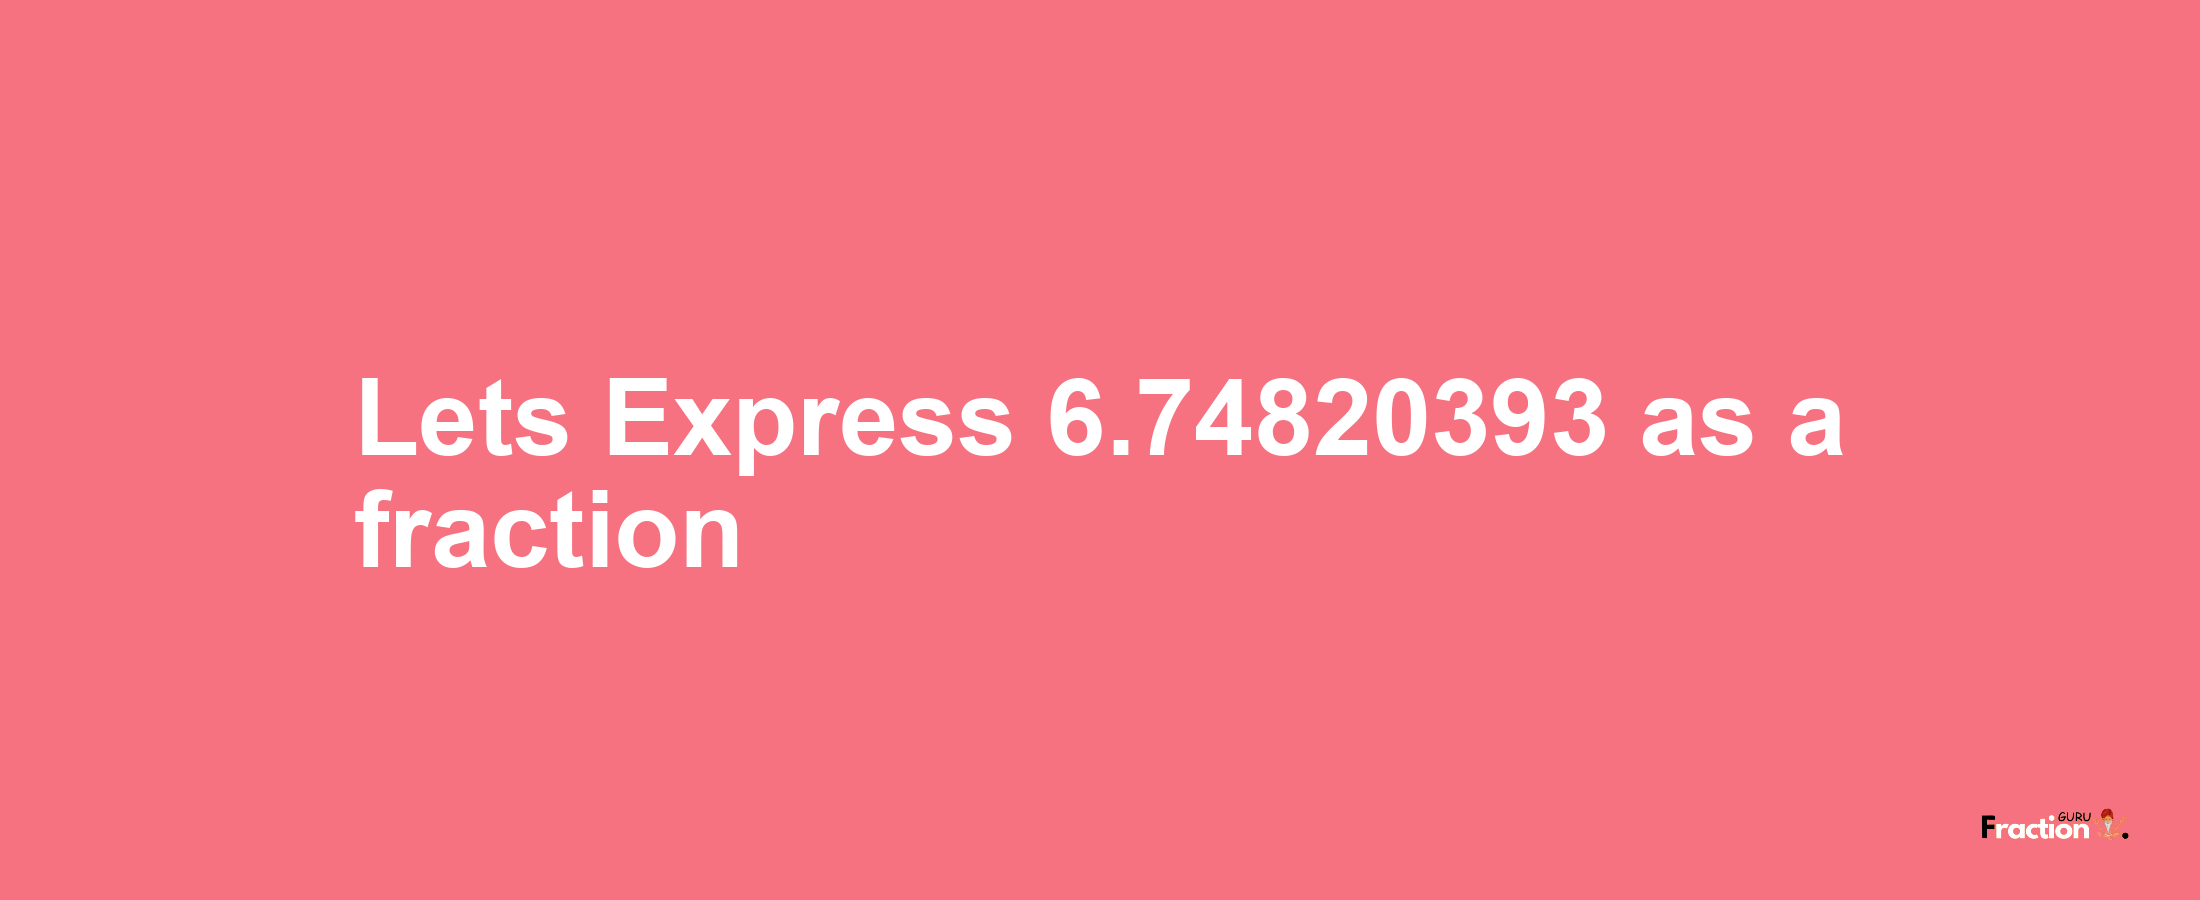 Lets Express 6.74820393 as afraction